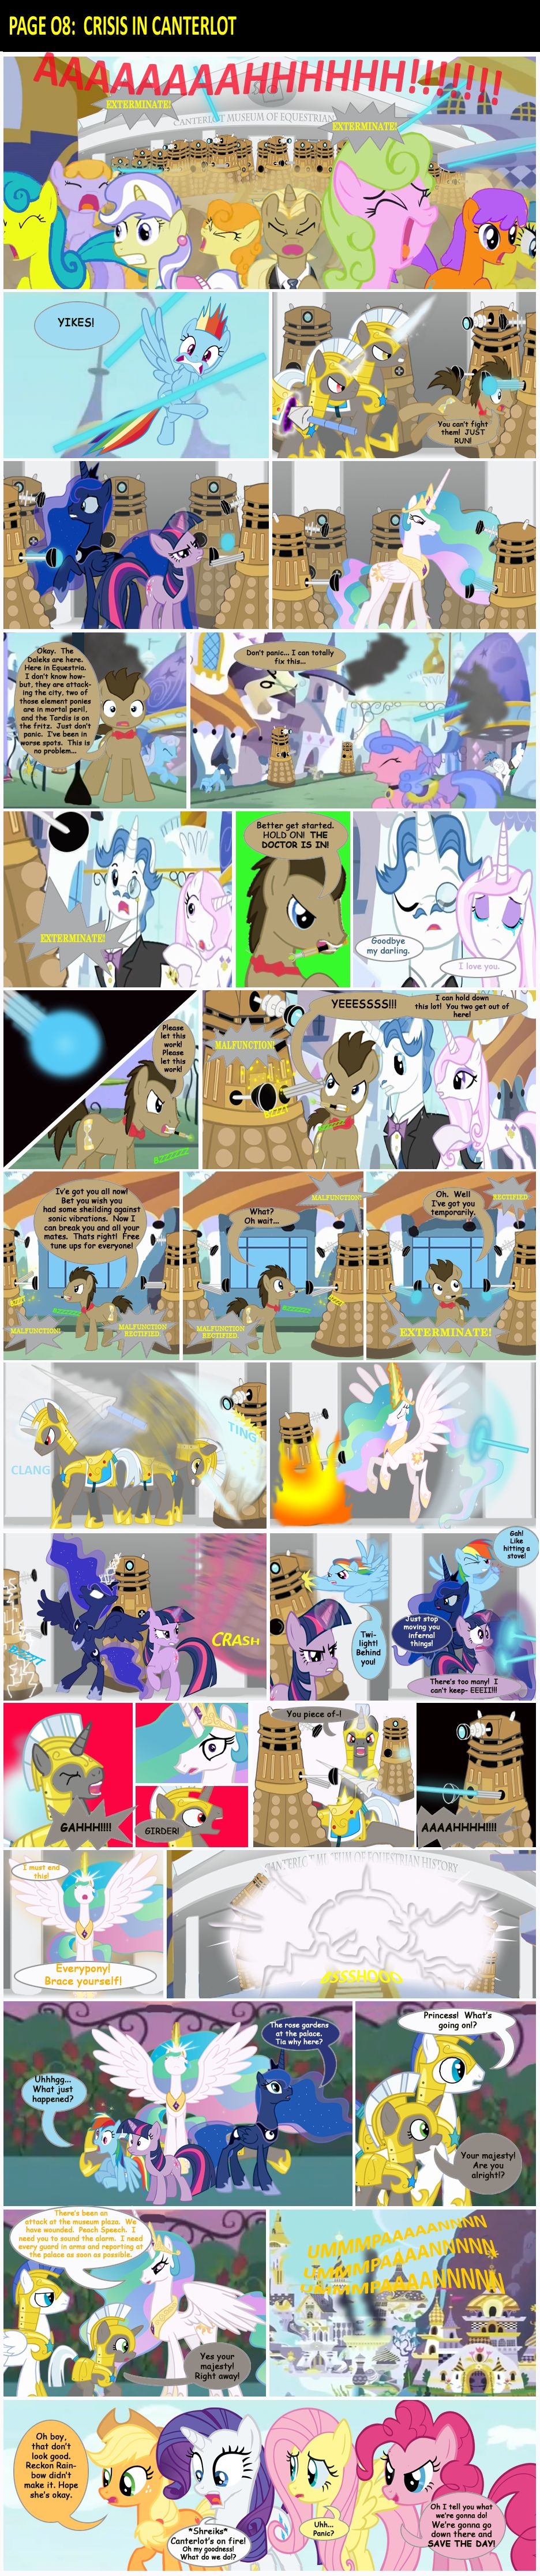 [ShwiggityShwah] Doctor Whooves: Elder (My Little Pony: Friendship is Magic) [English] [Ongoing] 7